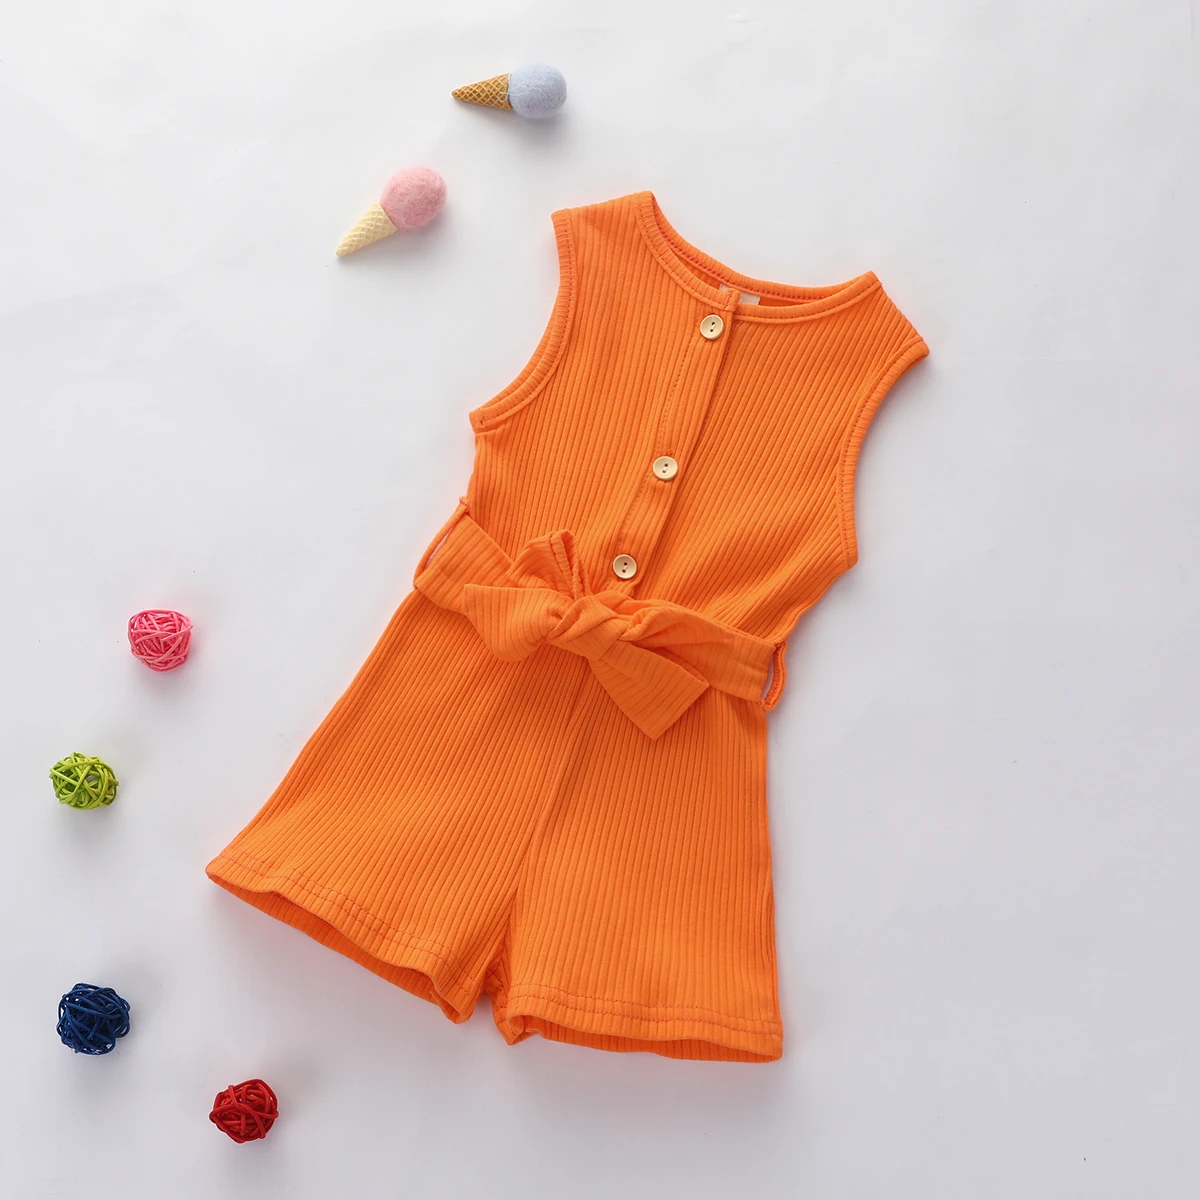 

Baby Girls Rib Knitted Playsuit with Sashes 0-18M Newborn Infant Toddler Summer Casual Cotton Sleeveless Jumpsuit Romper Outfits